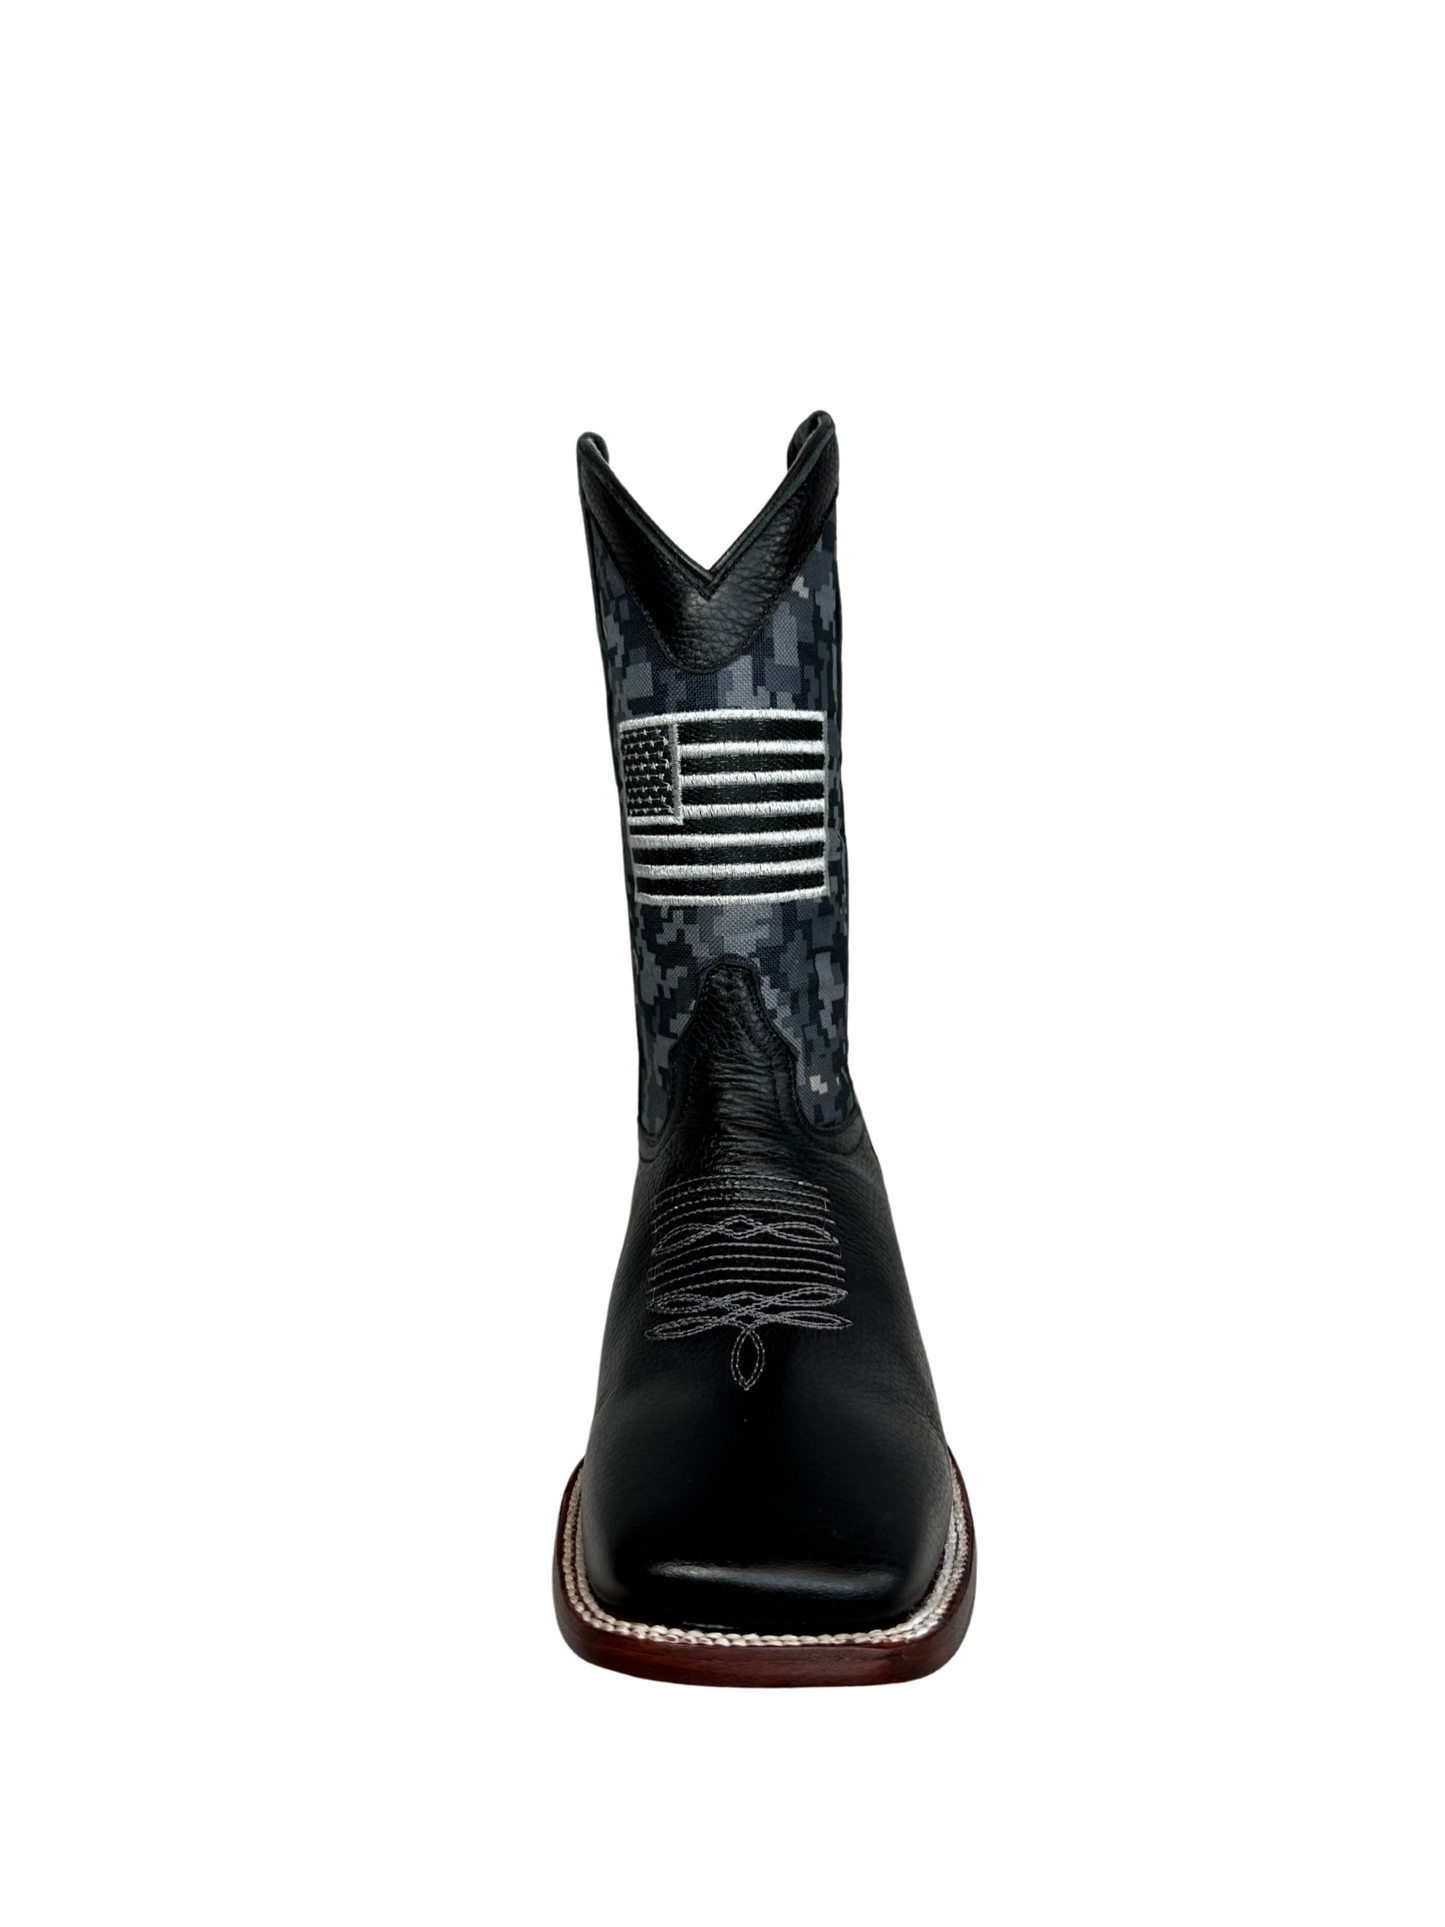 Los Angeles Black Leather Sqaure Toe Boot